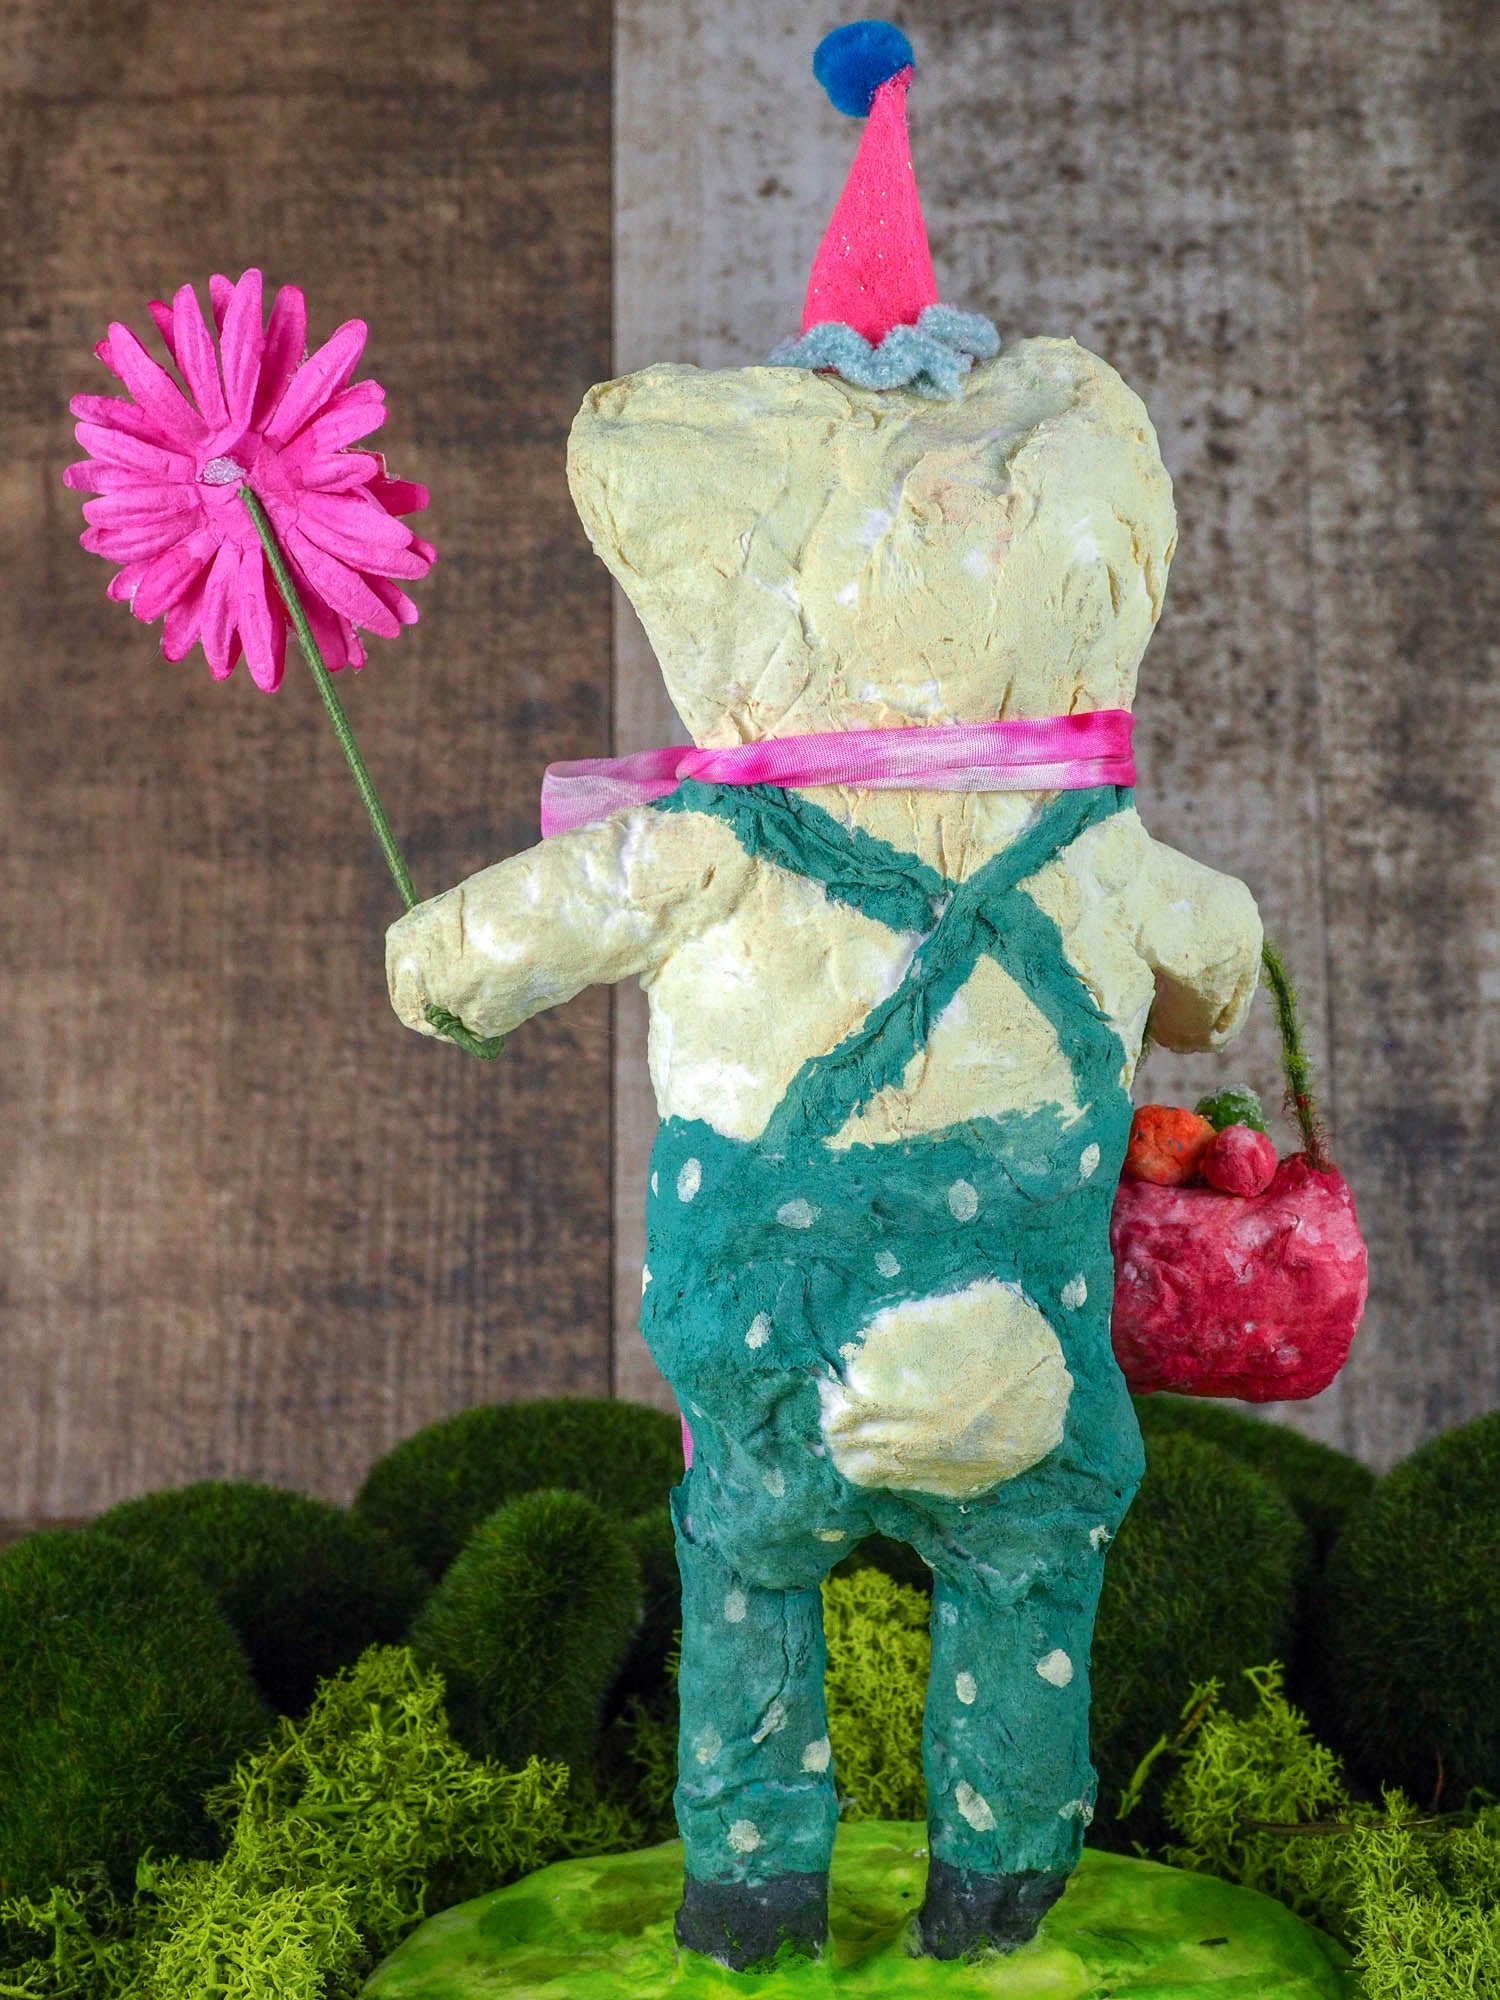 Spring always inspires Danita to make beautiful handmade decorations for when the flowers start to bloom, just like this 10" spun cotton handmade Easter bear art doll by Danita, hand painted and dressed in a blue polka dot suit.